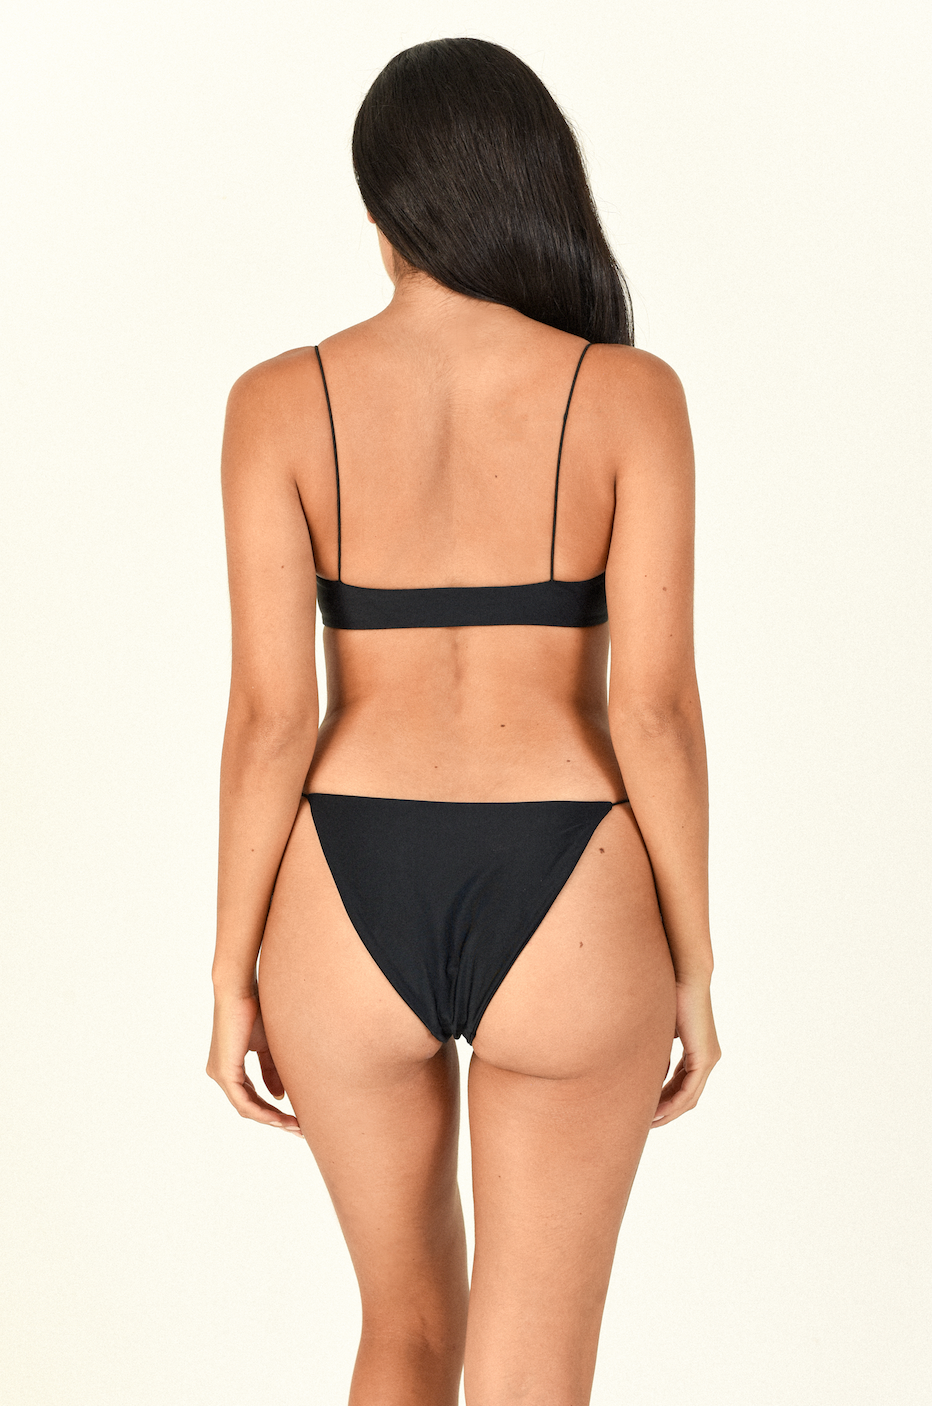 Load image into Gallery viewer, Model standing backwards while wearing the Micro Muse Scoop Top and Micro Bare Minimum Bottom in Black